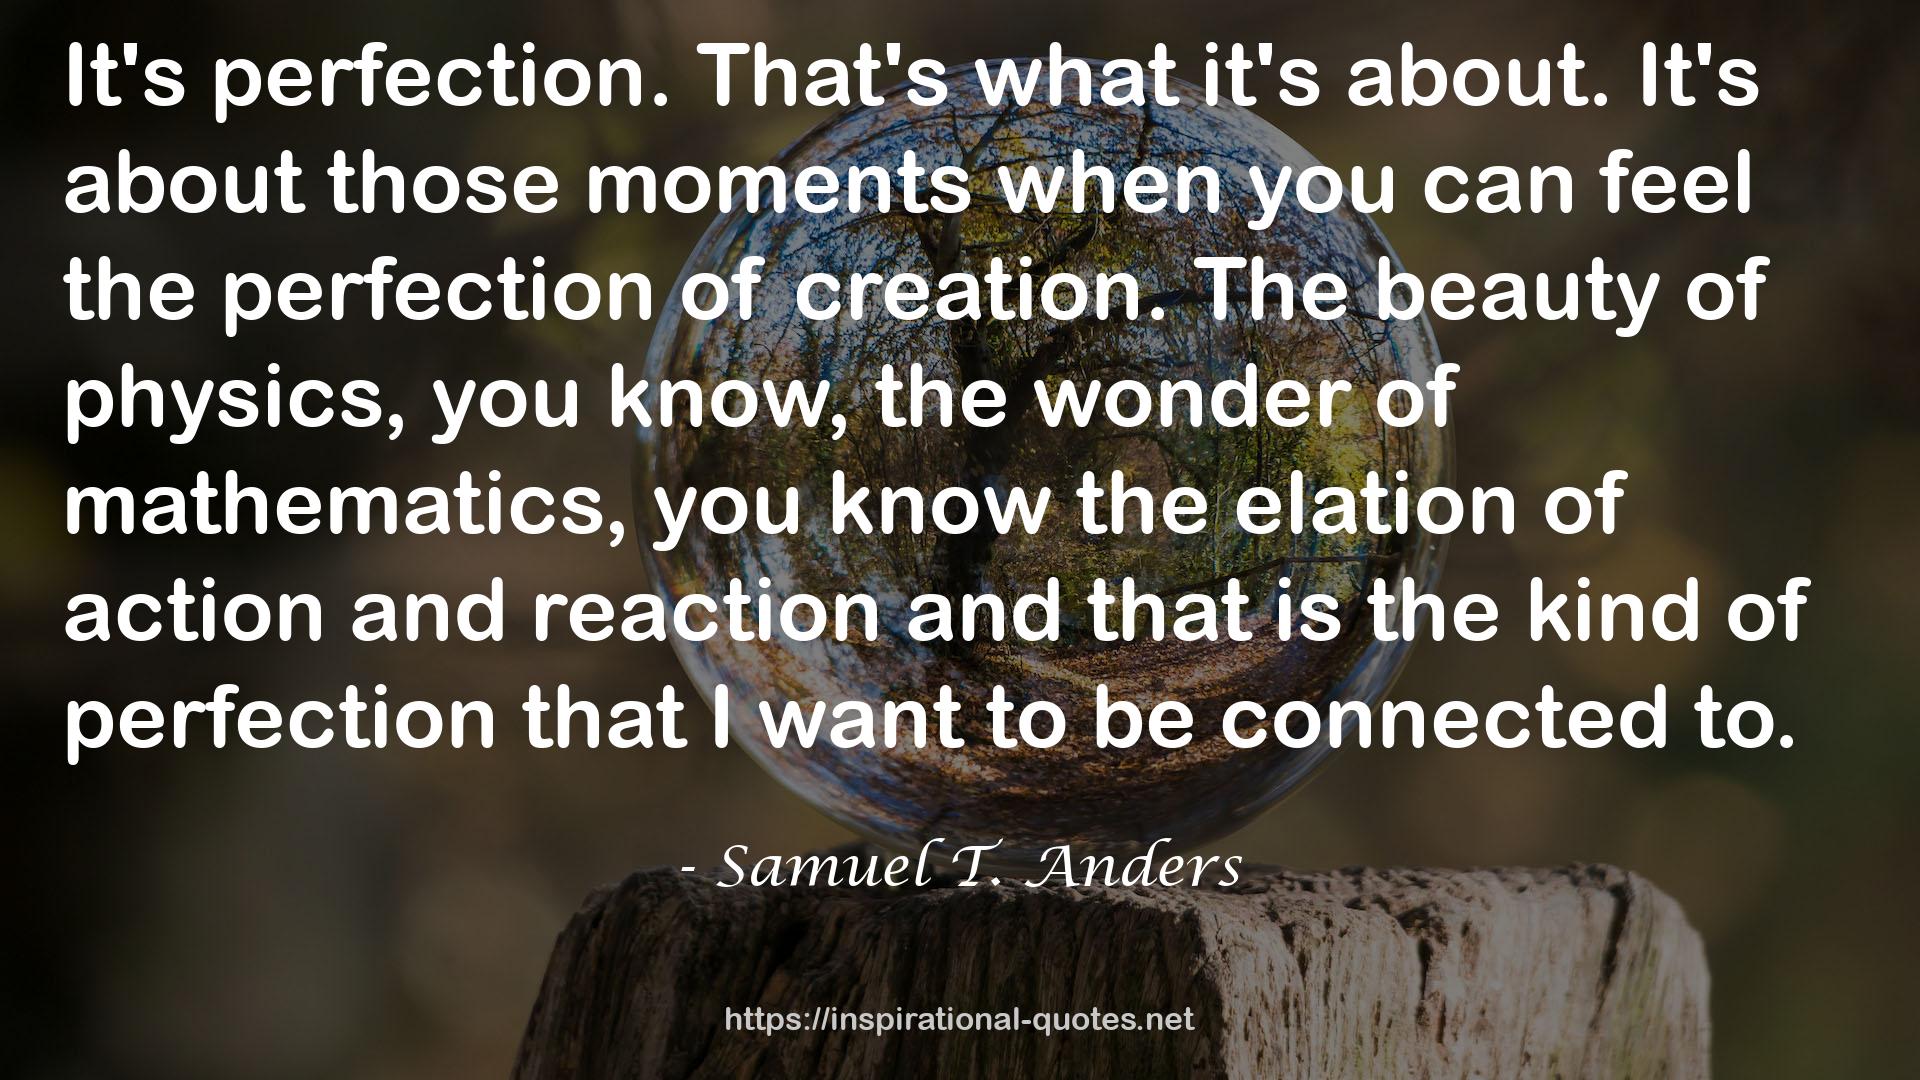 Samuel T. Anders QUOTES